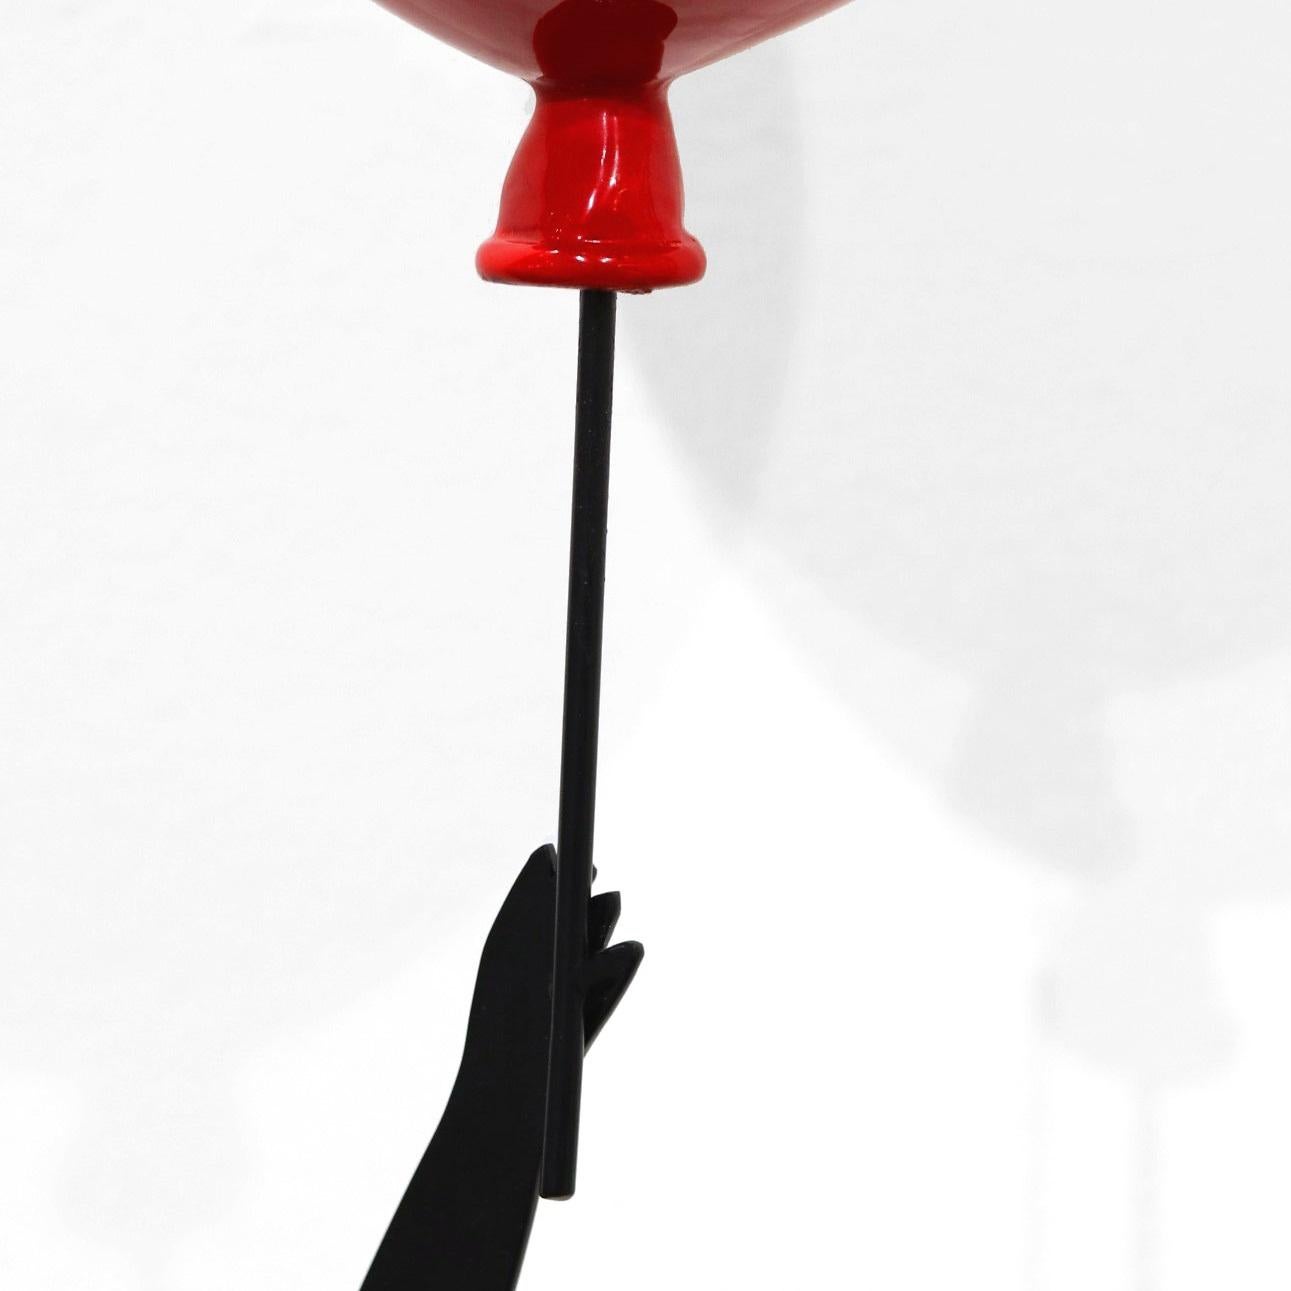 Hope (23/25) - Figurative Steel Sculpture with Glossy Red Balloon 1